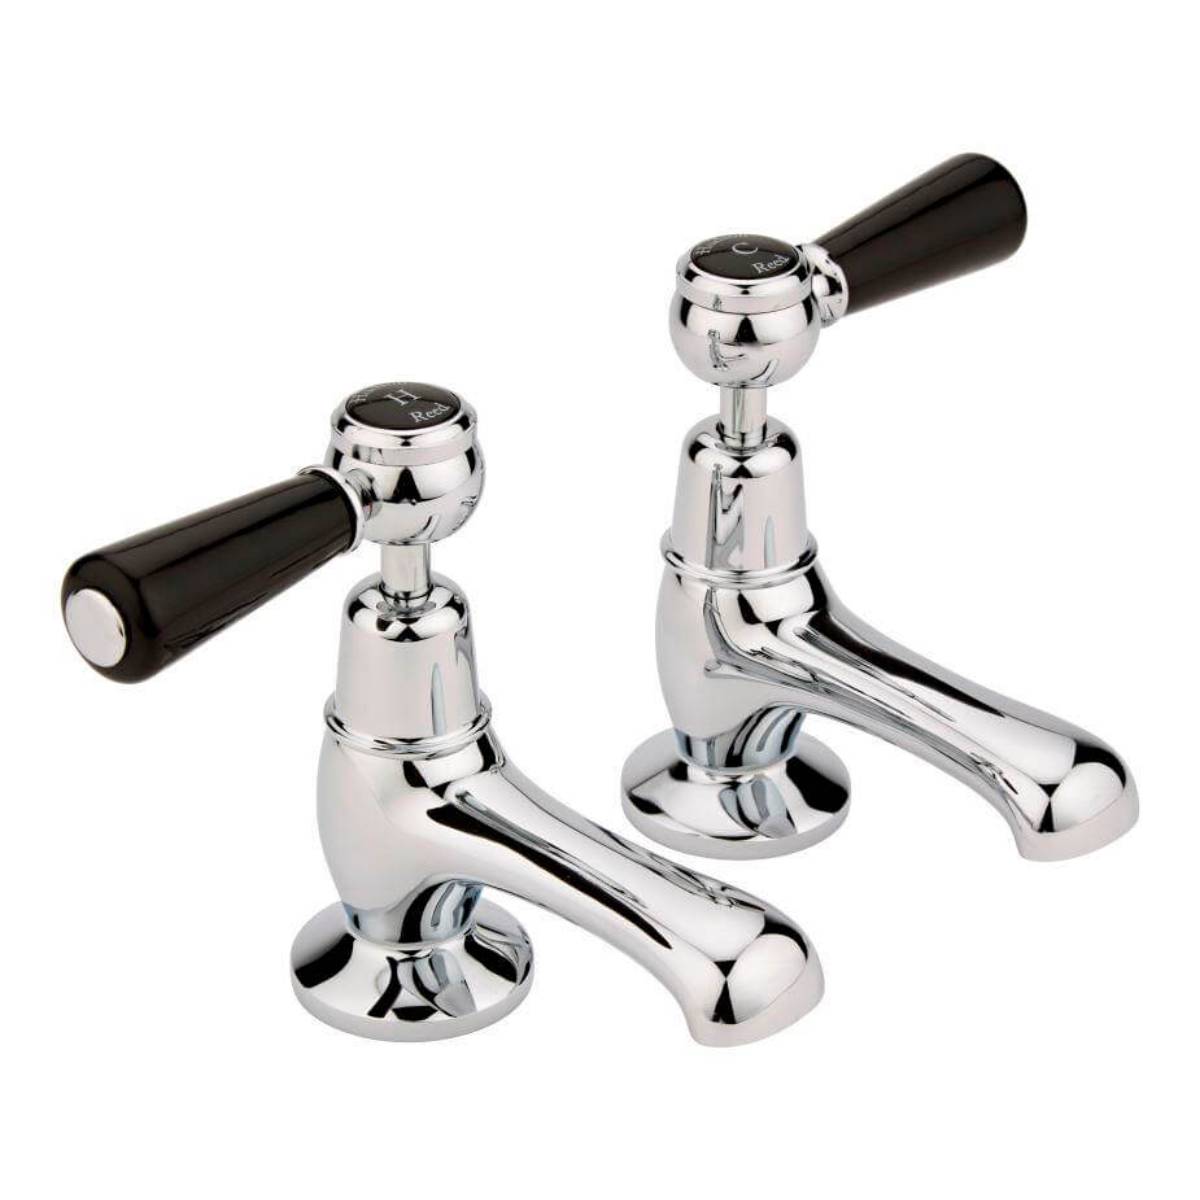 Hudson Reed Topaz with Lever Basin Pillar Taps & Domed Collar - Black BC401DL (2422)